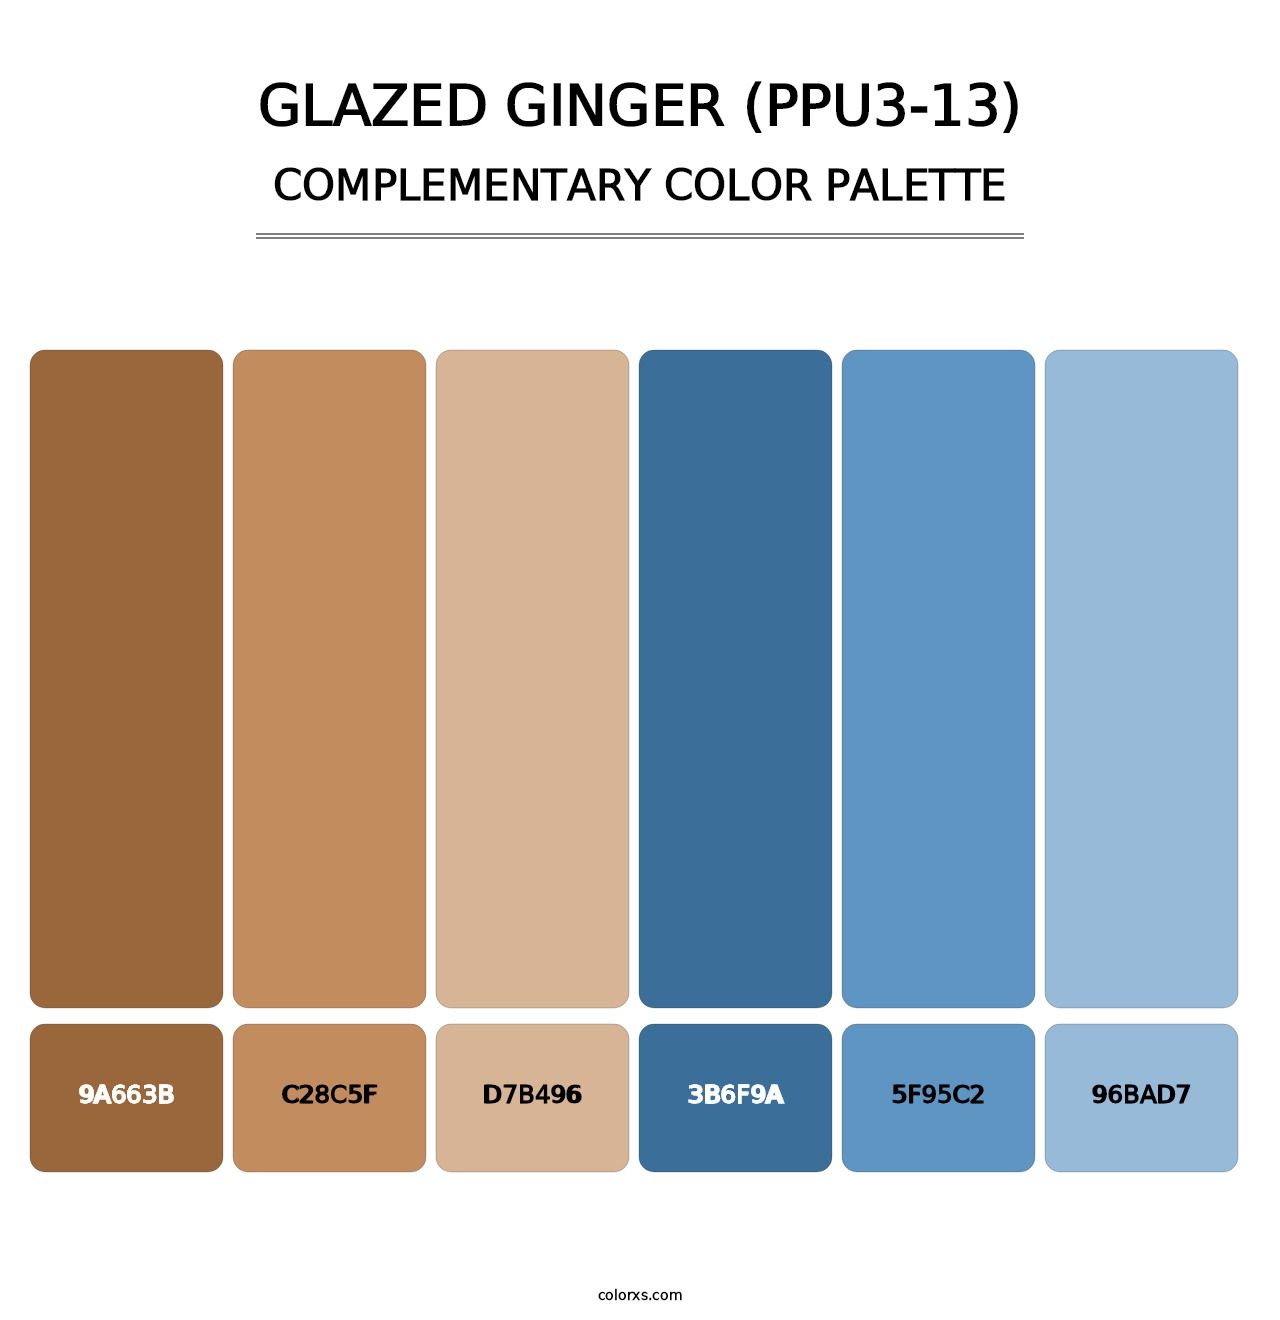 Glazed Ginger (PPU3-13) - Complementary Color Palette